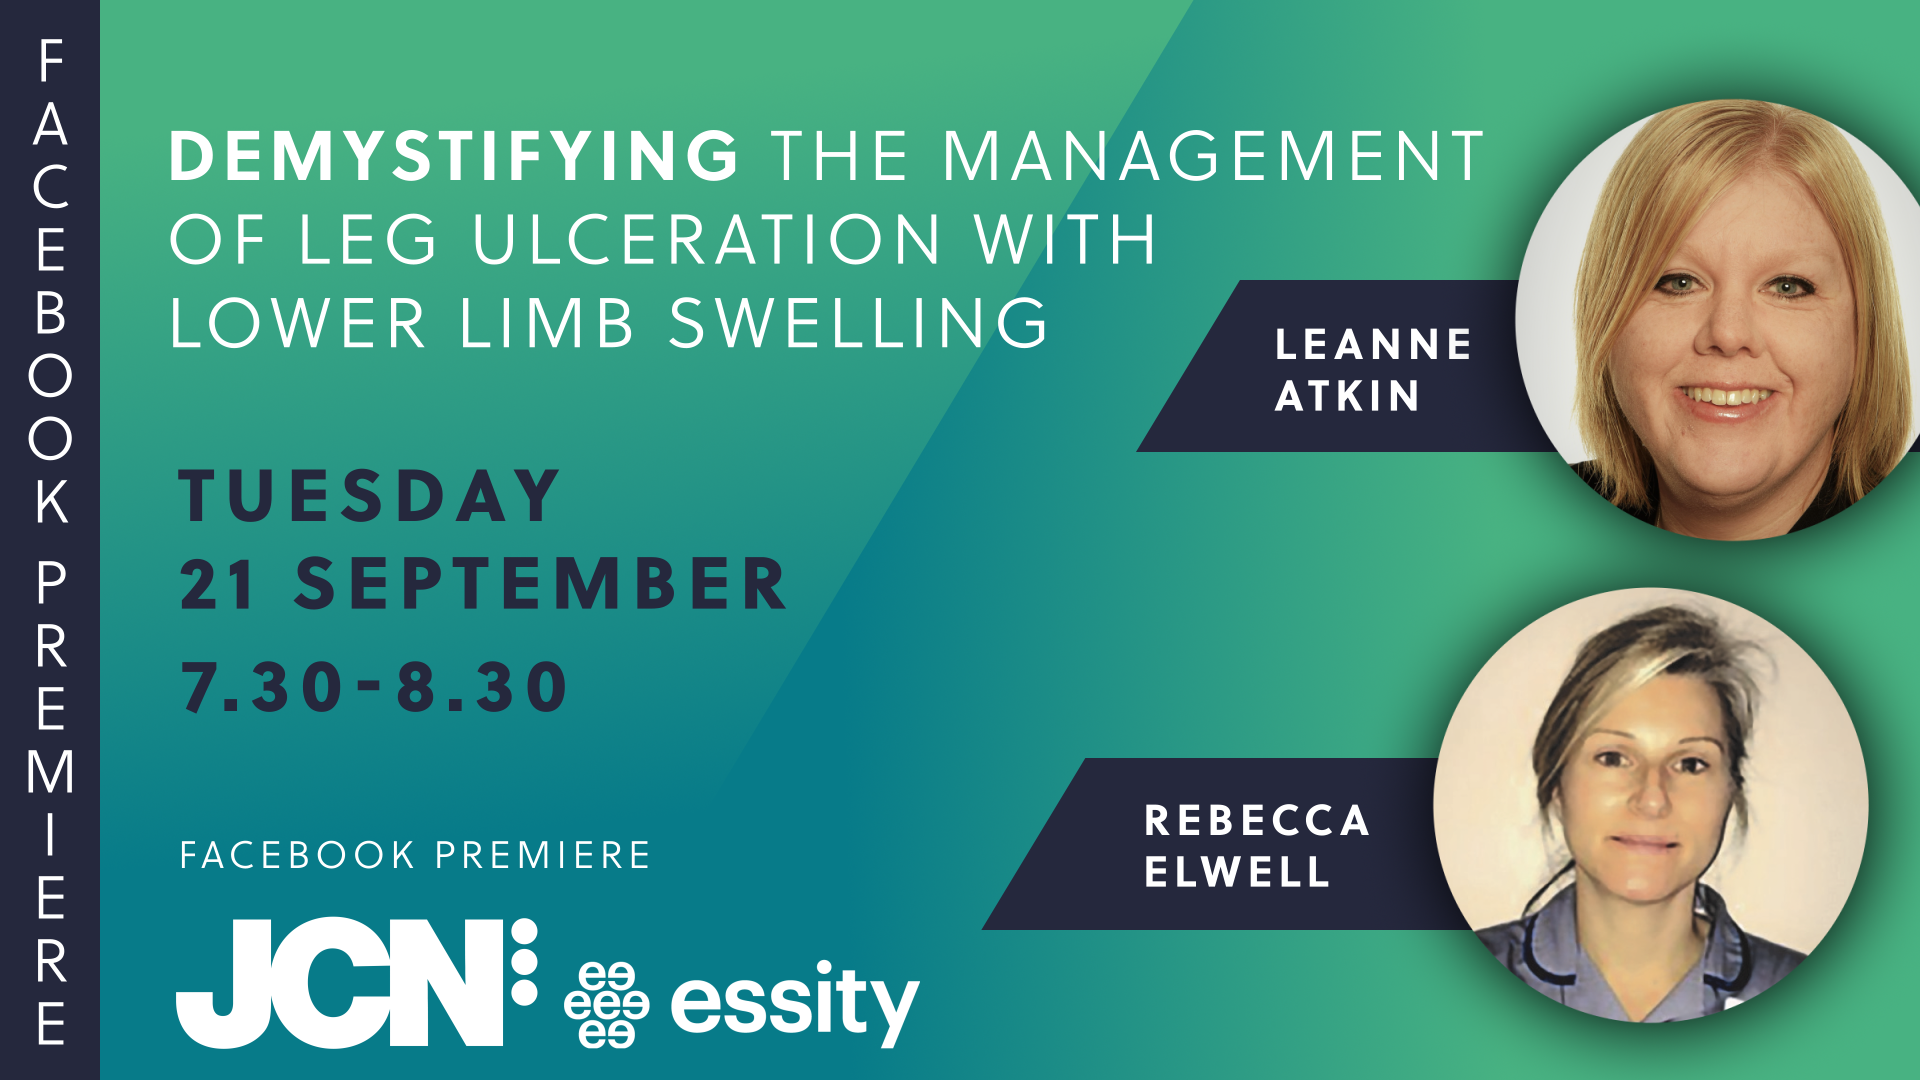 Facebook Live: Demystifying the management of leg ulceration with lower limb swelling